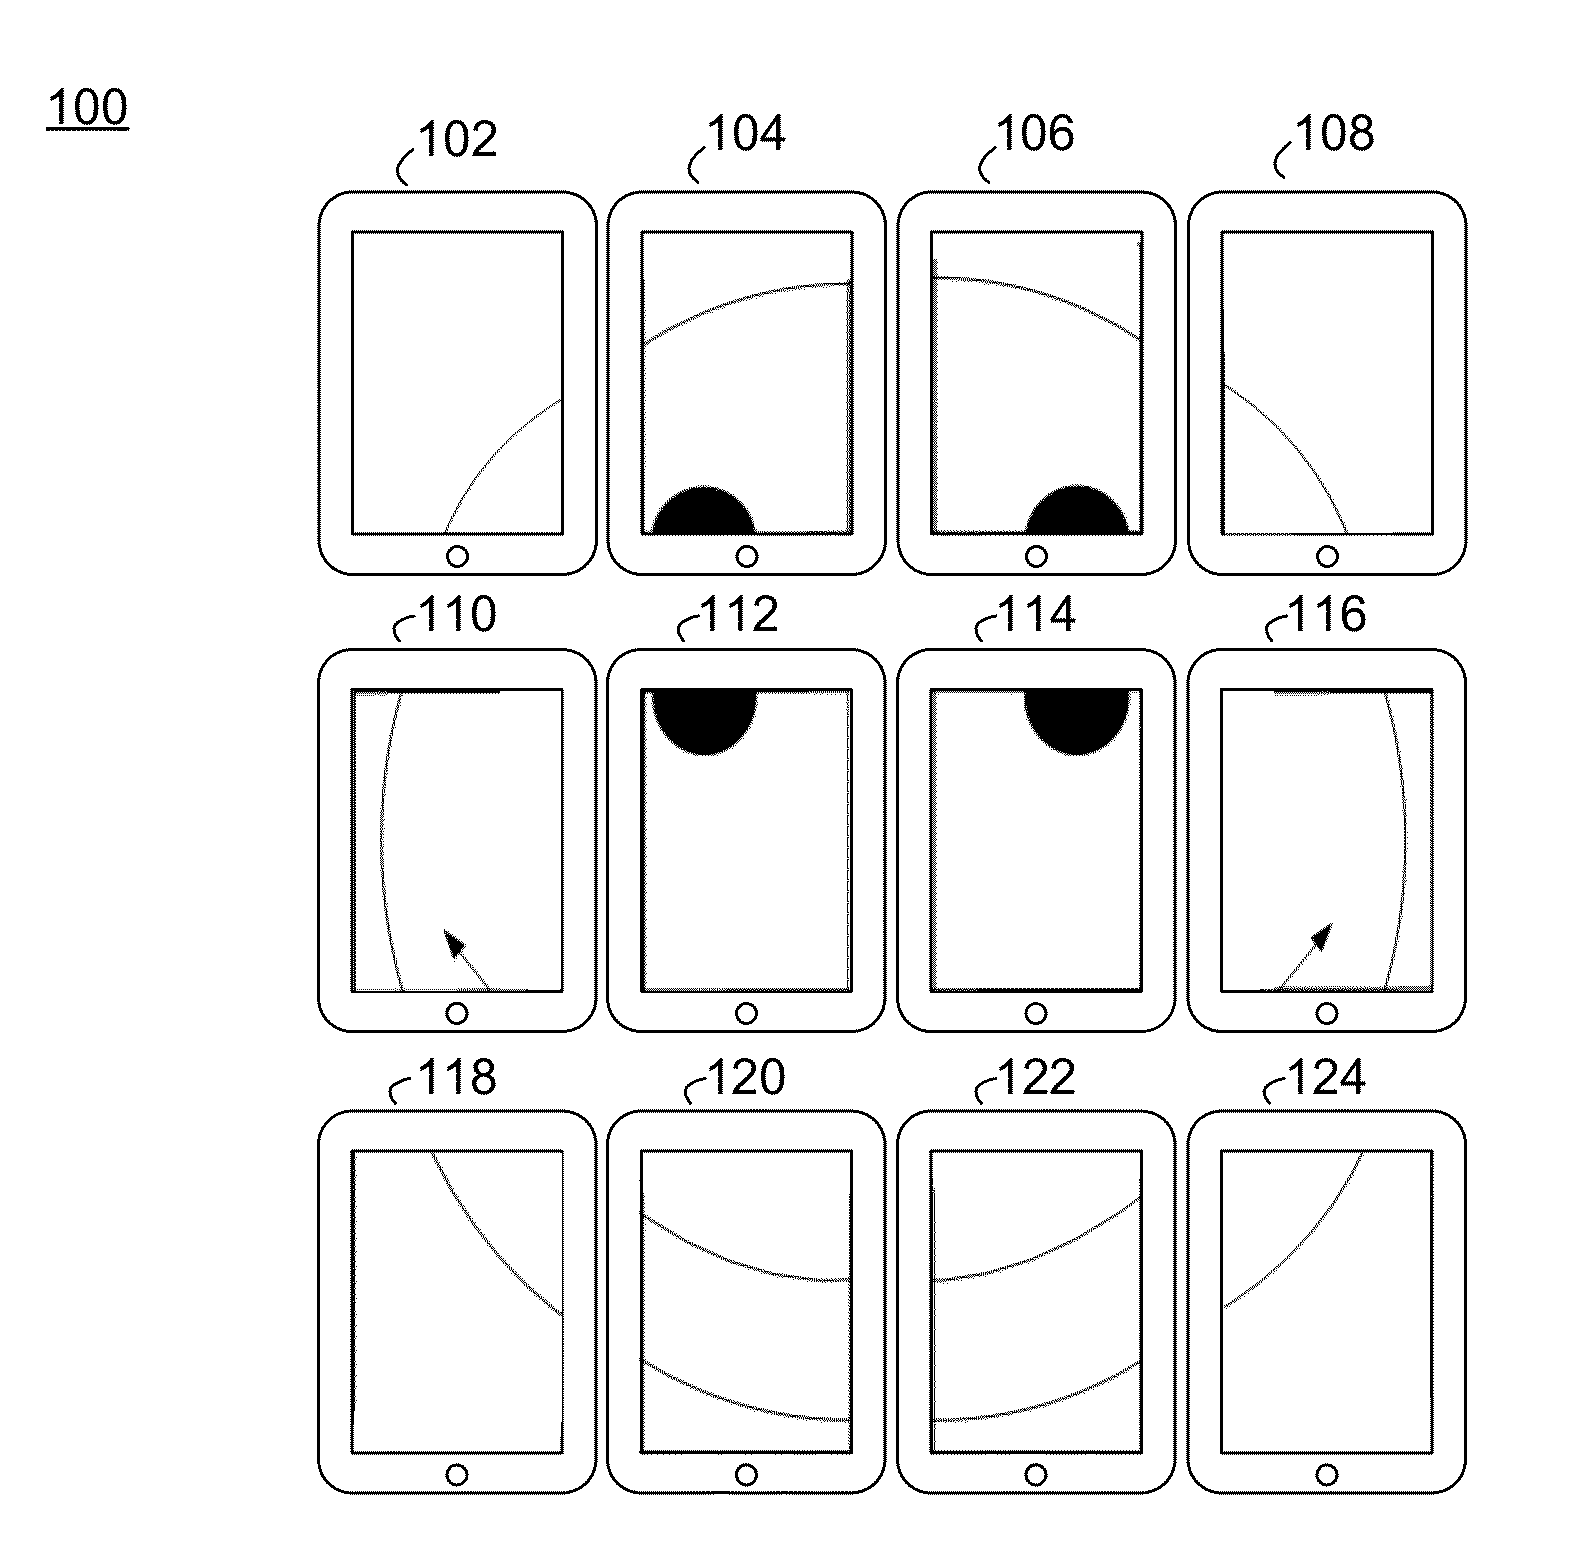 Interactive synchronized multi-screen display